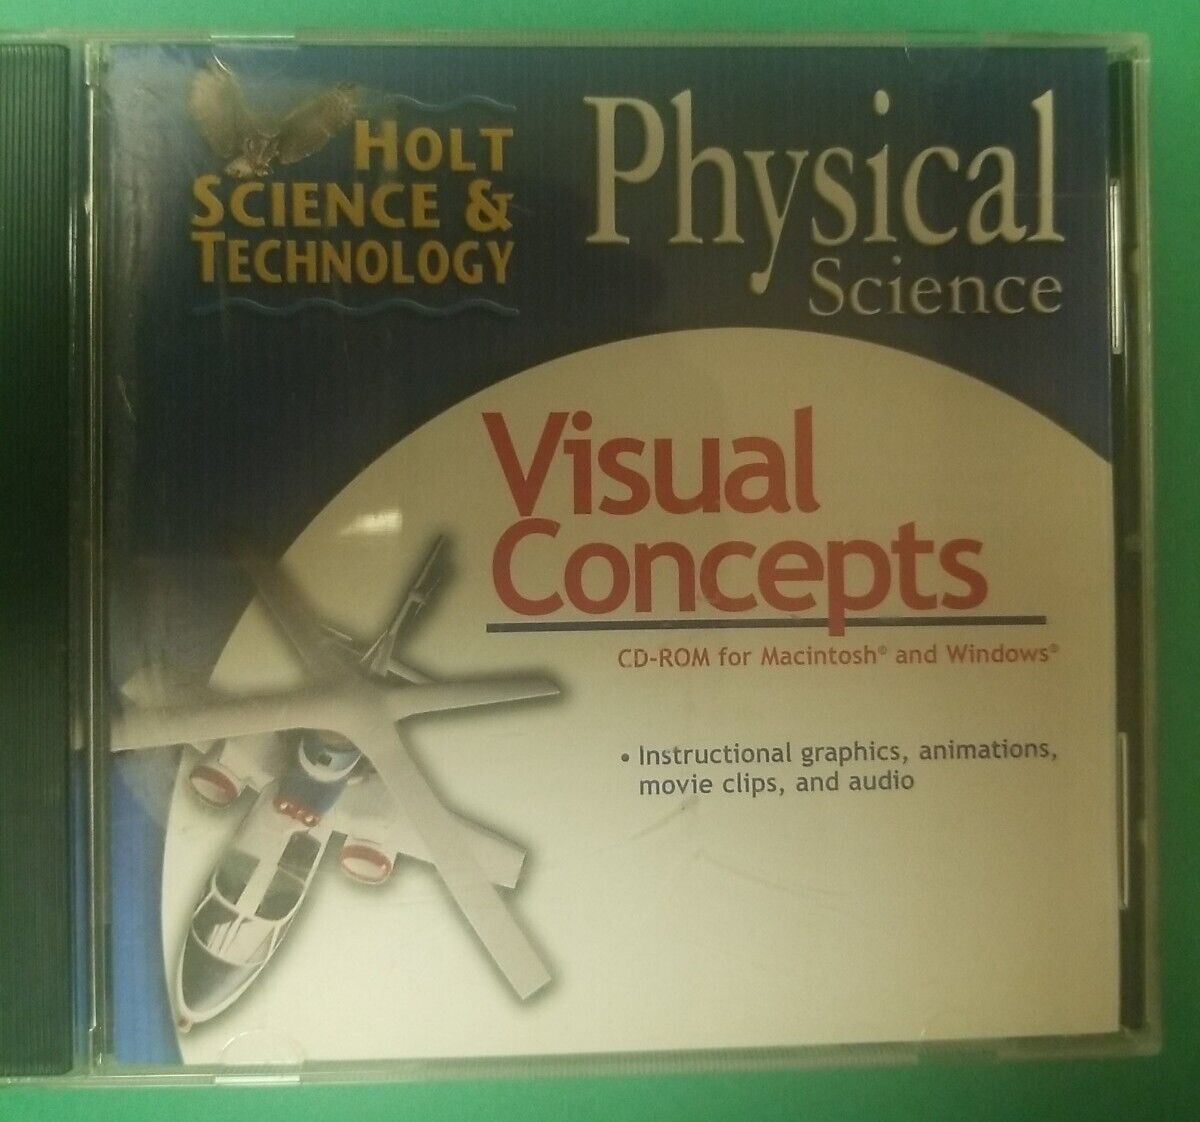 Holt Science & Technology Physical Science Visual Concepts PC CD-ROM 